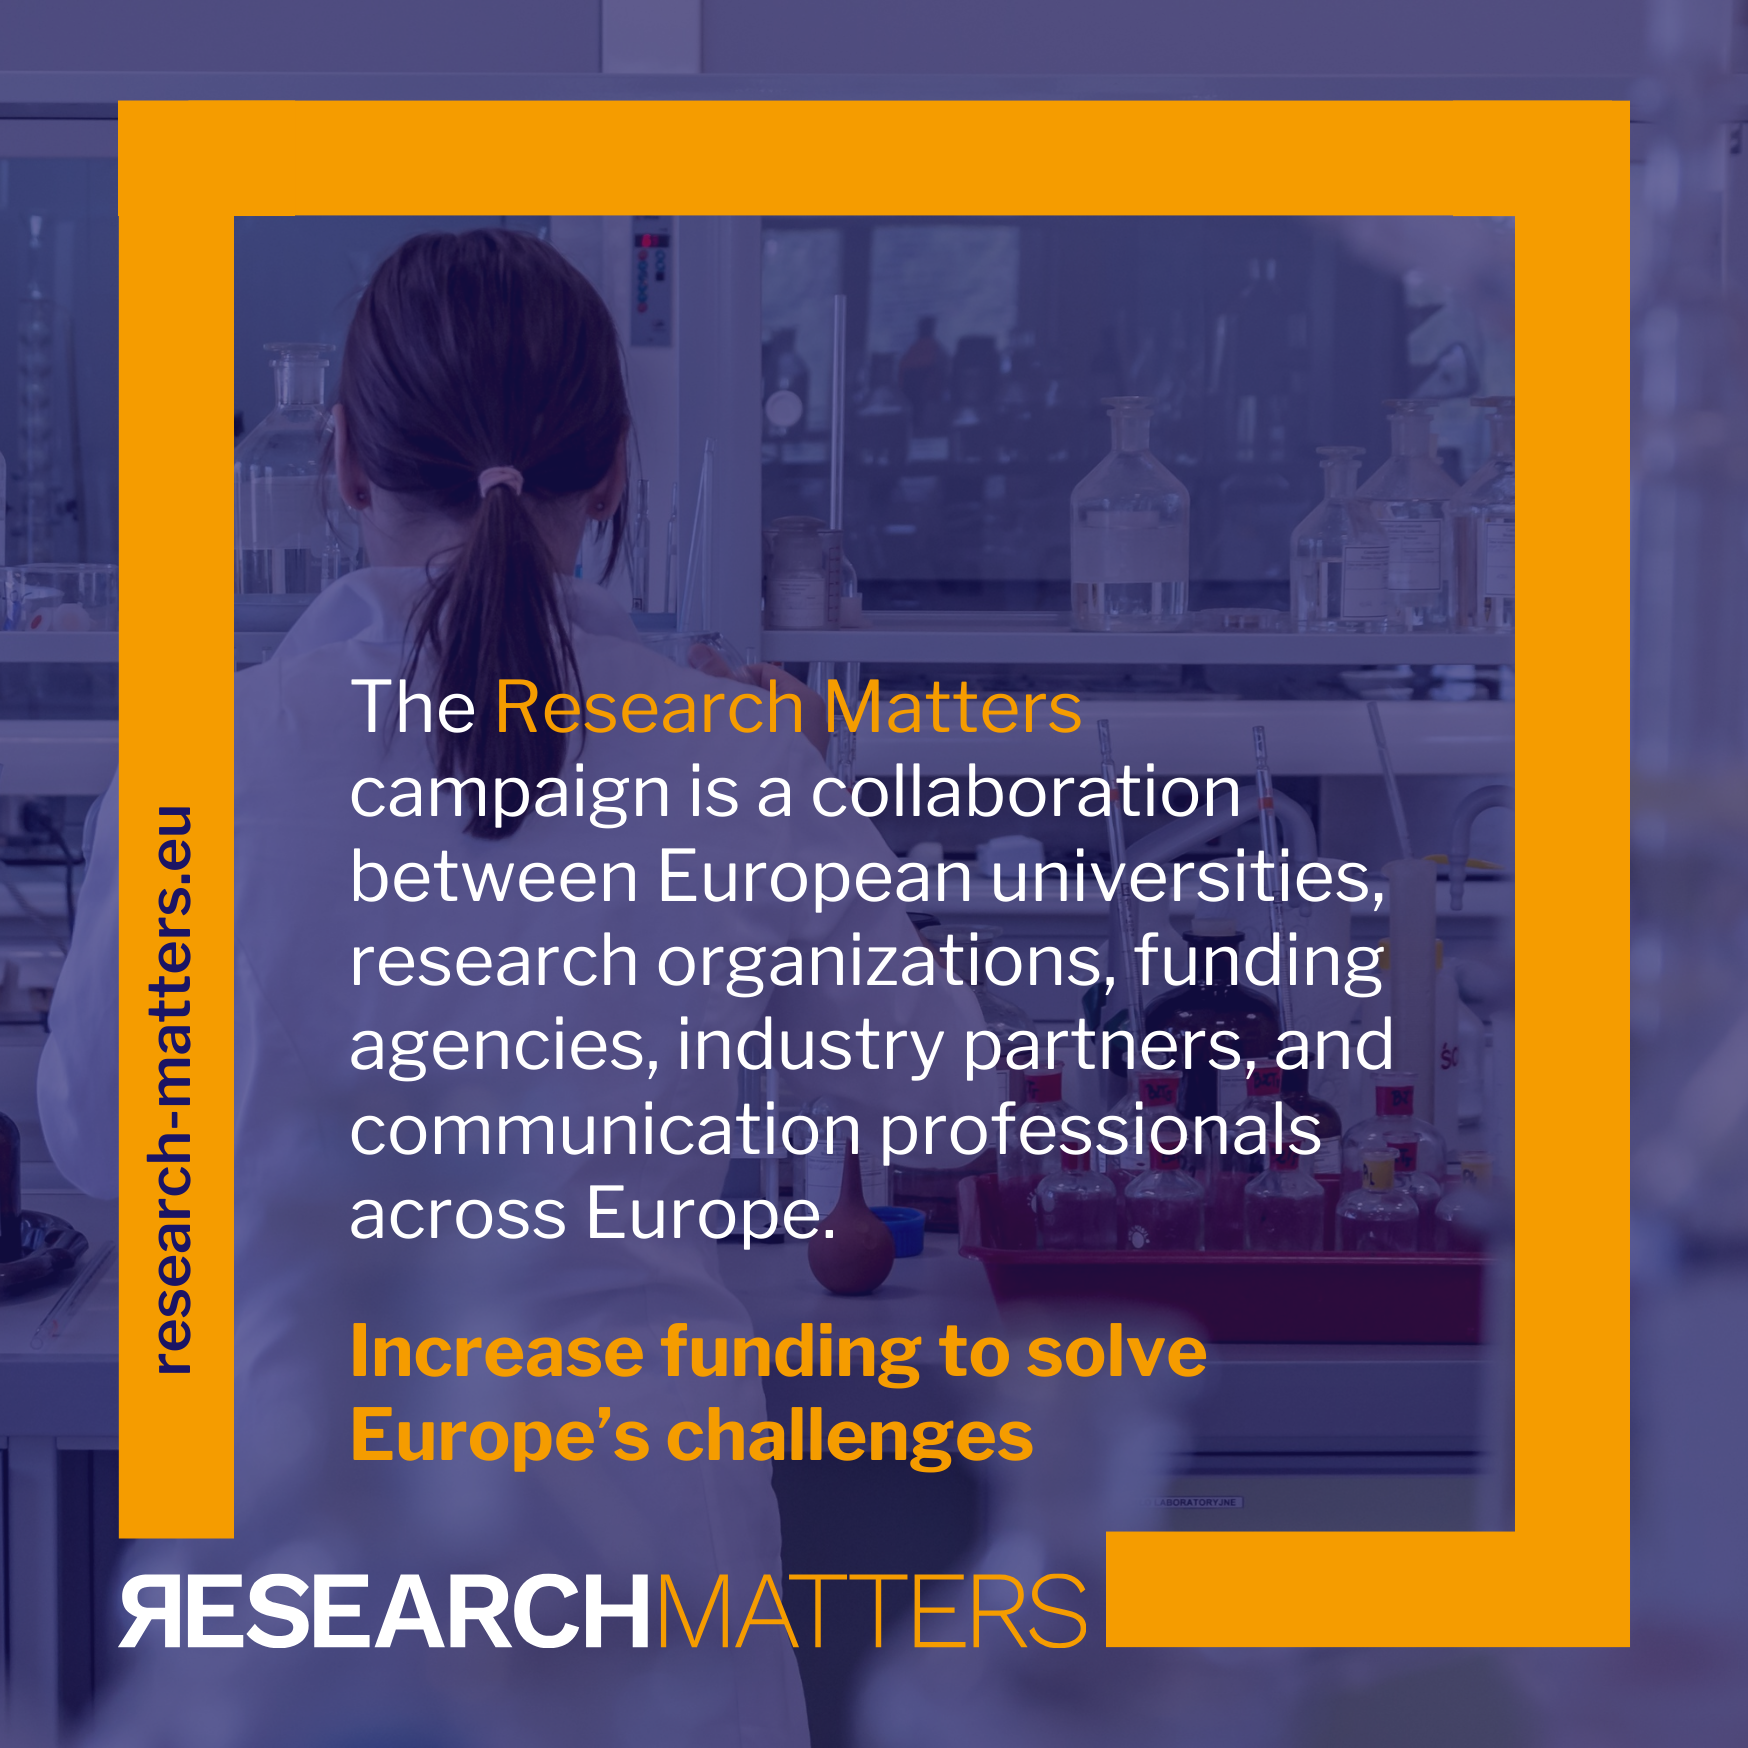 Research matters